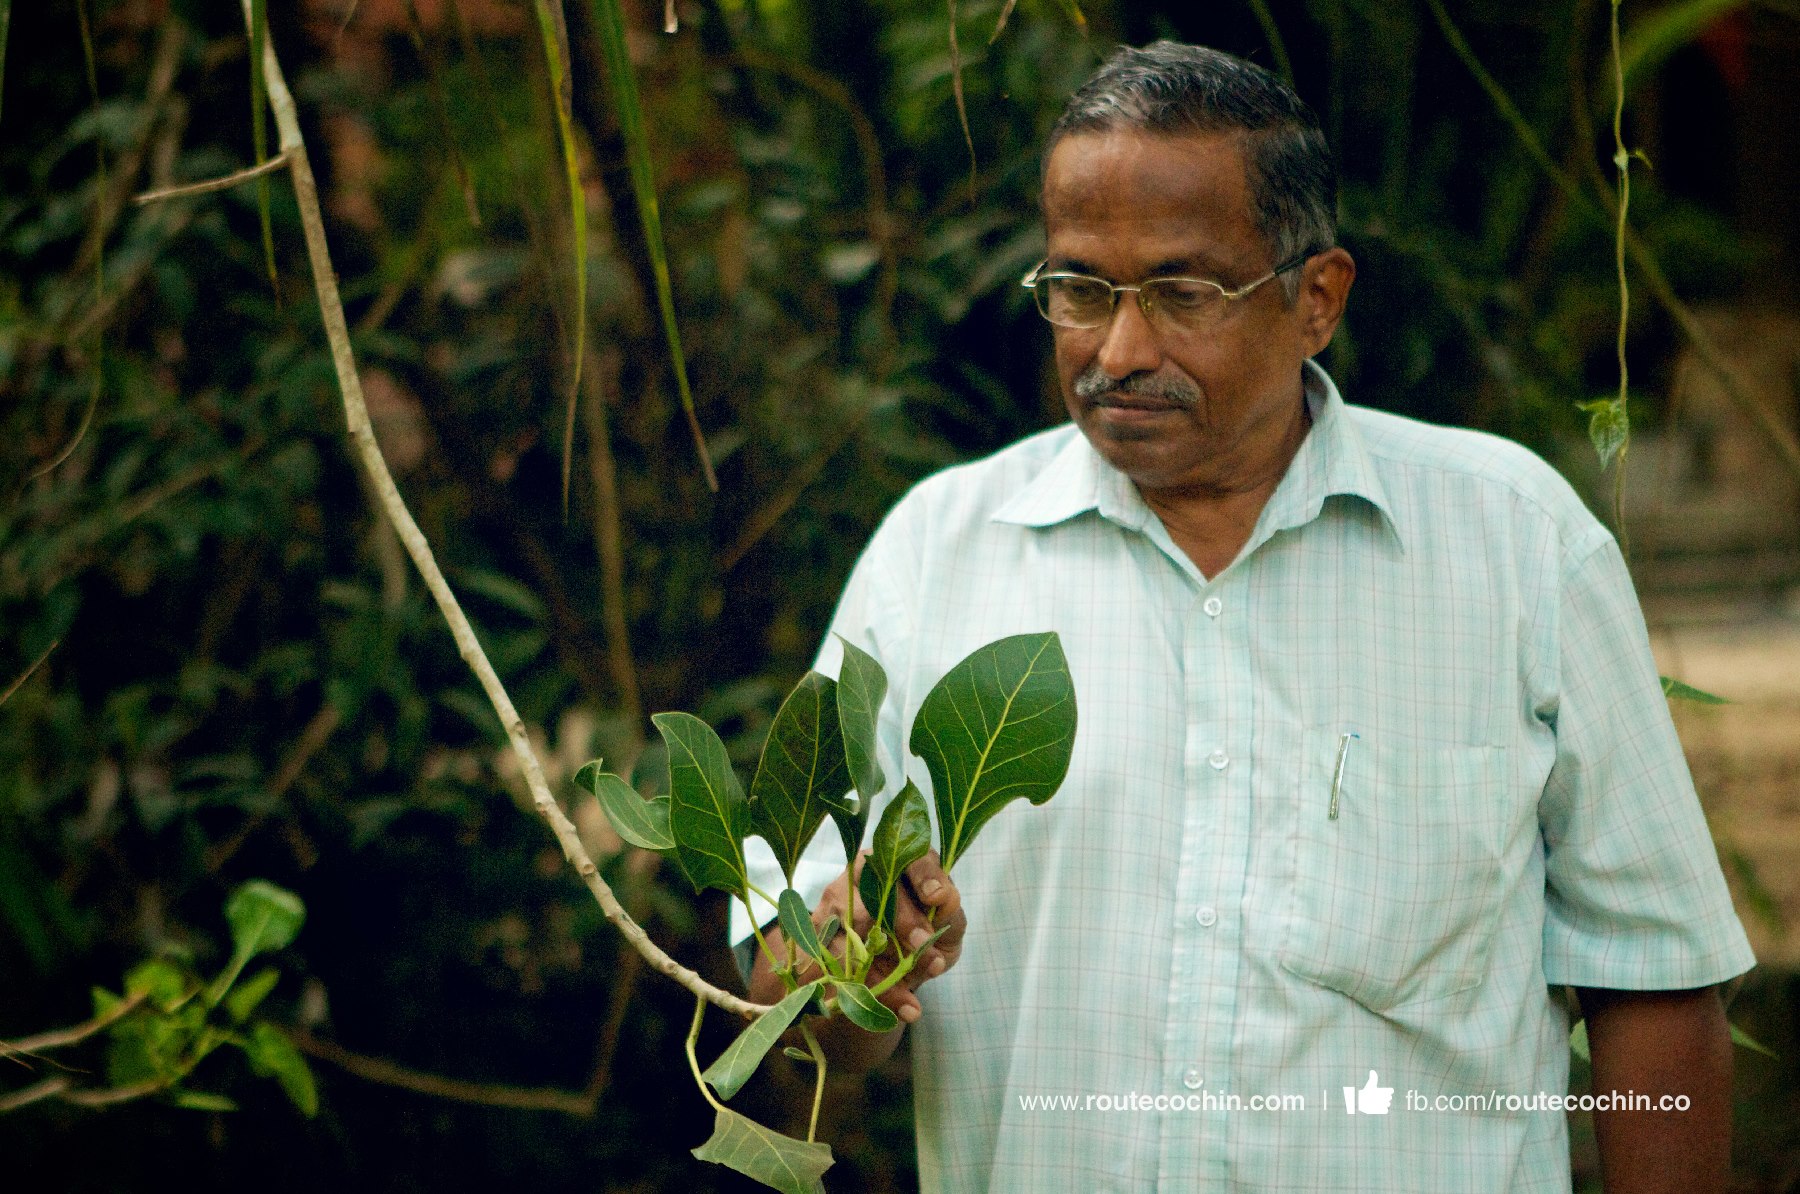 THE WONDERLAND  Alungal Farms -  Purushothama Kamath, a horticulturist, who is on a mission to protect endangered herbs and trees.